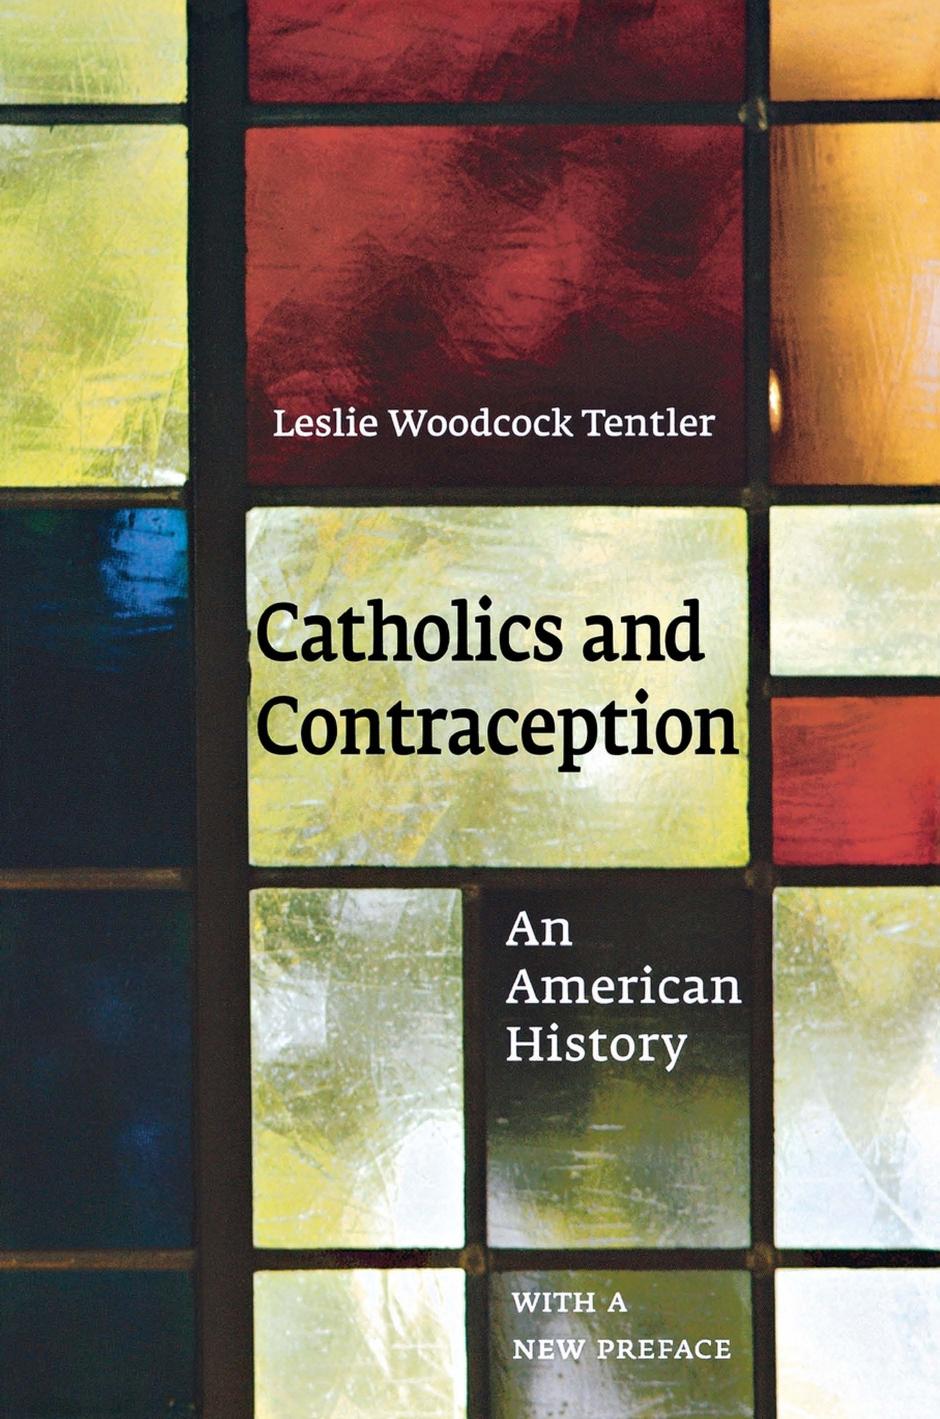 Catholics and Contraception: An American History by Leslie Woodcock Tentler